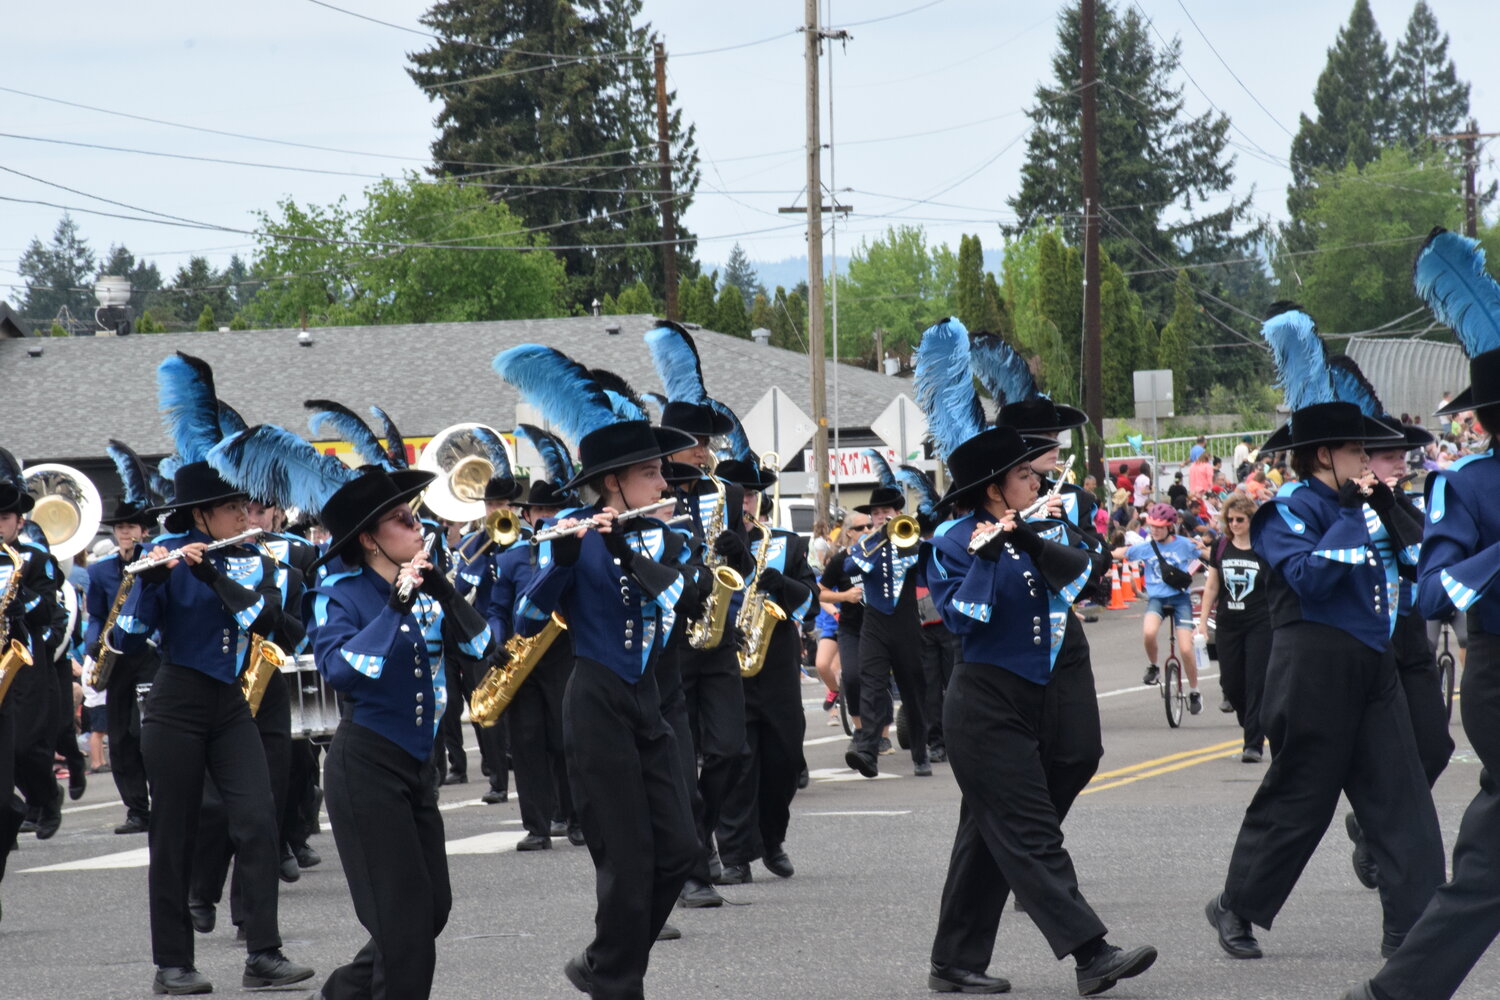 The Hockinson High School marching band participates in the 2023 Hazel Dell Parade of Bands on May 20.